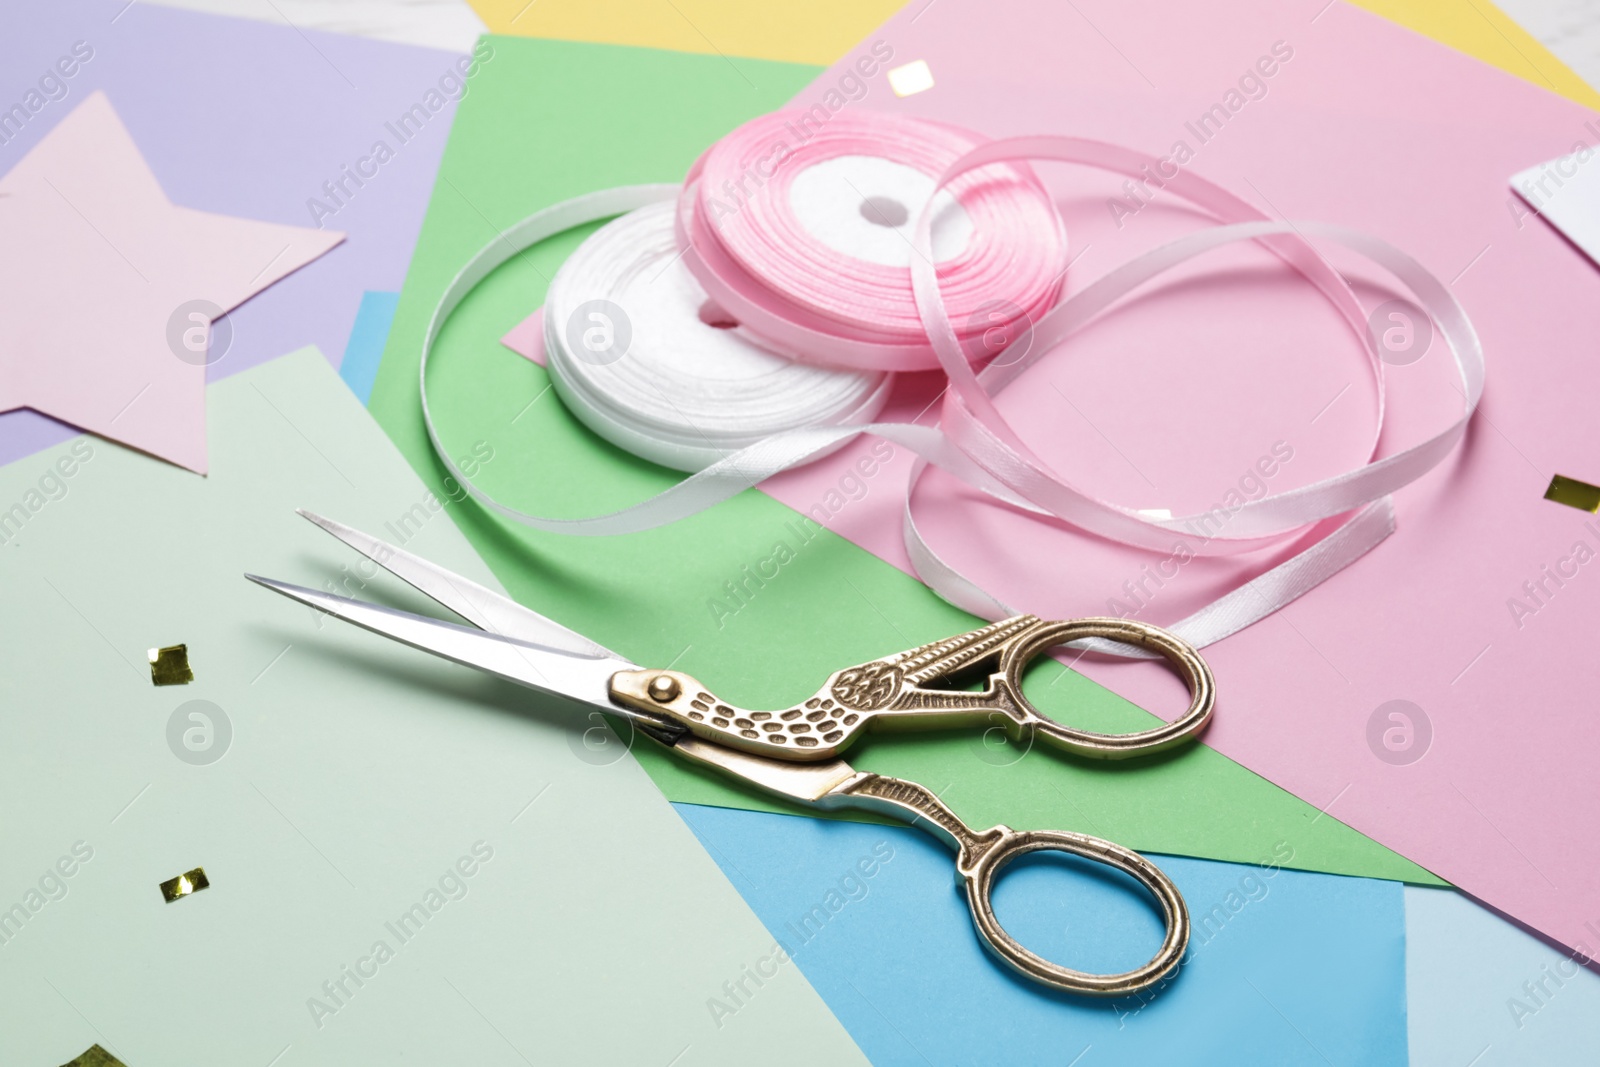 Photo of Pair of scissors near ribbons on colorful paper sheets, closeup